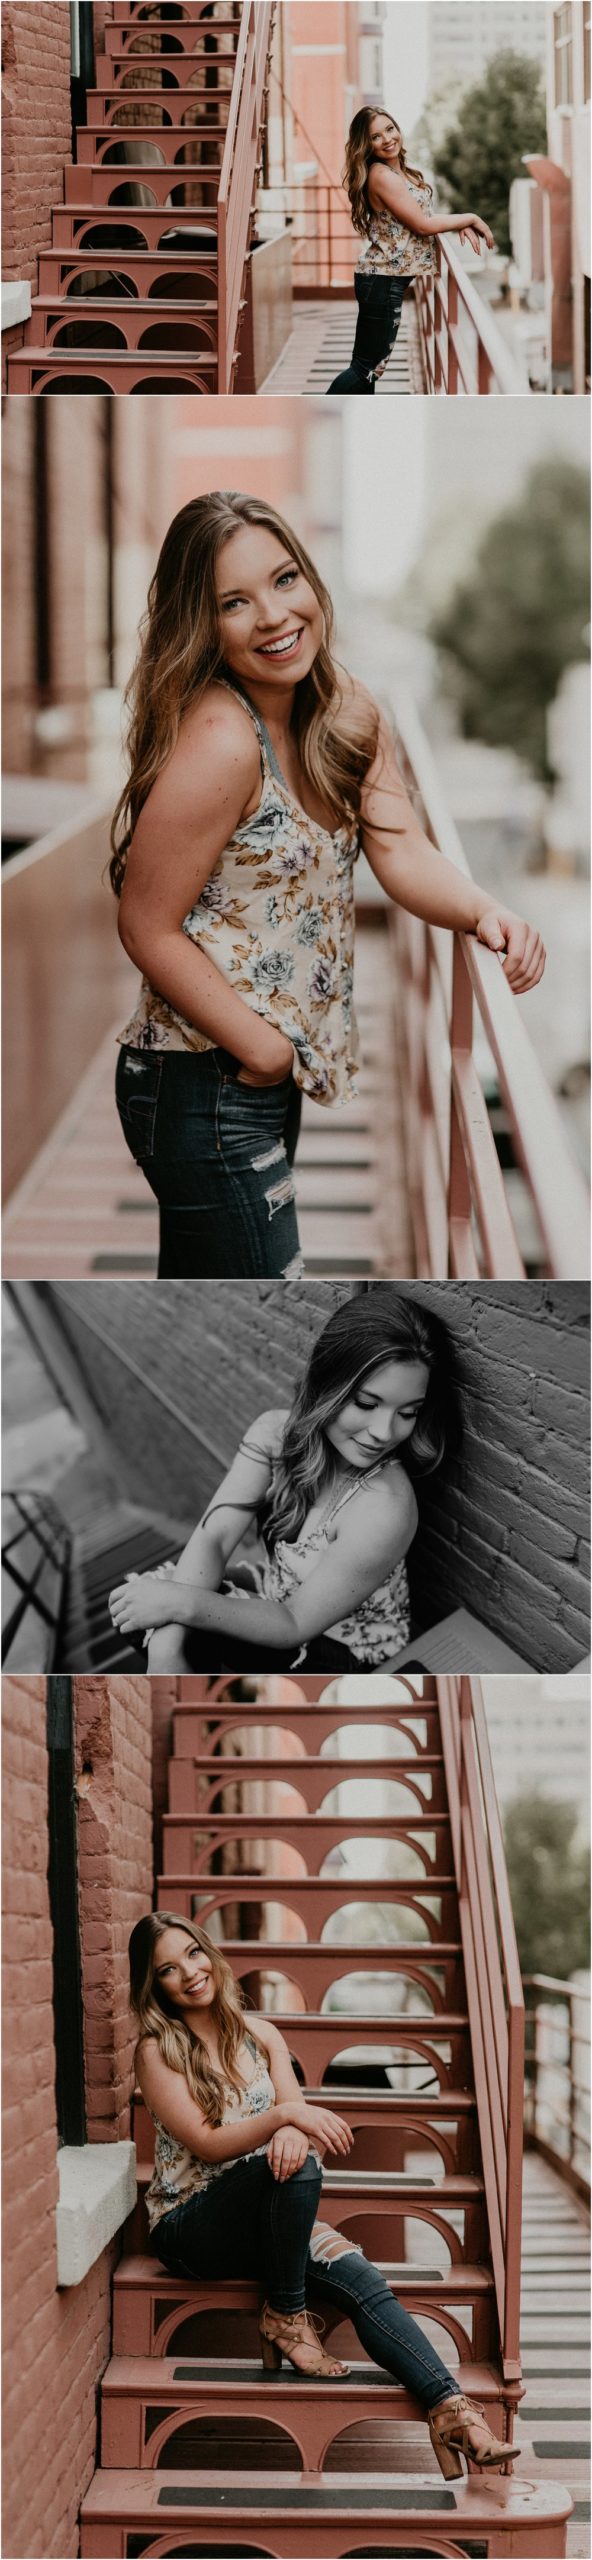 Makayla Madden Photography Boise Senior Photographer Fall Senior Pictures Urban Downtown Boise Outfit Location Ideas